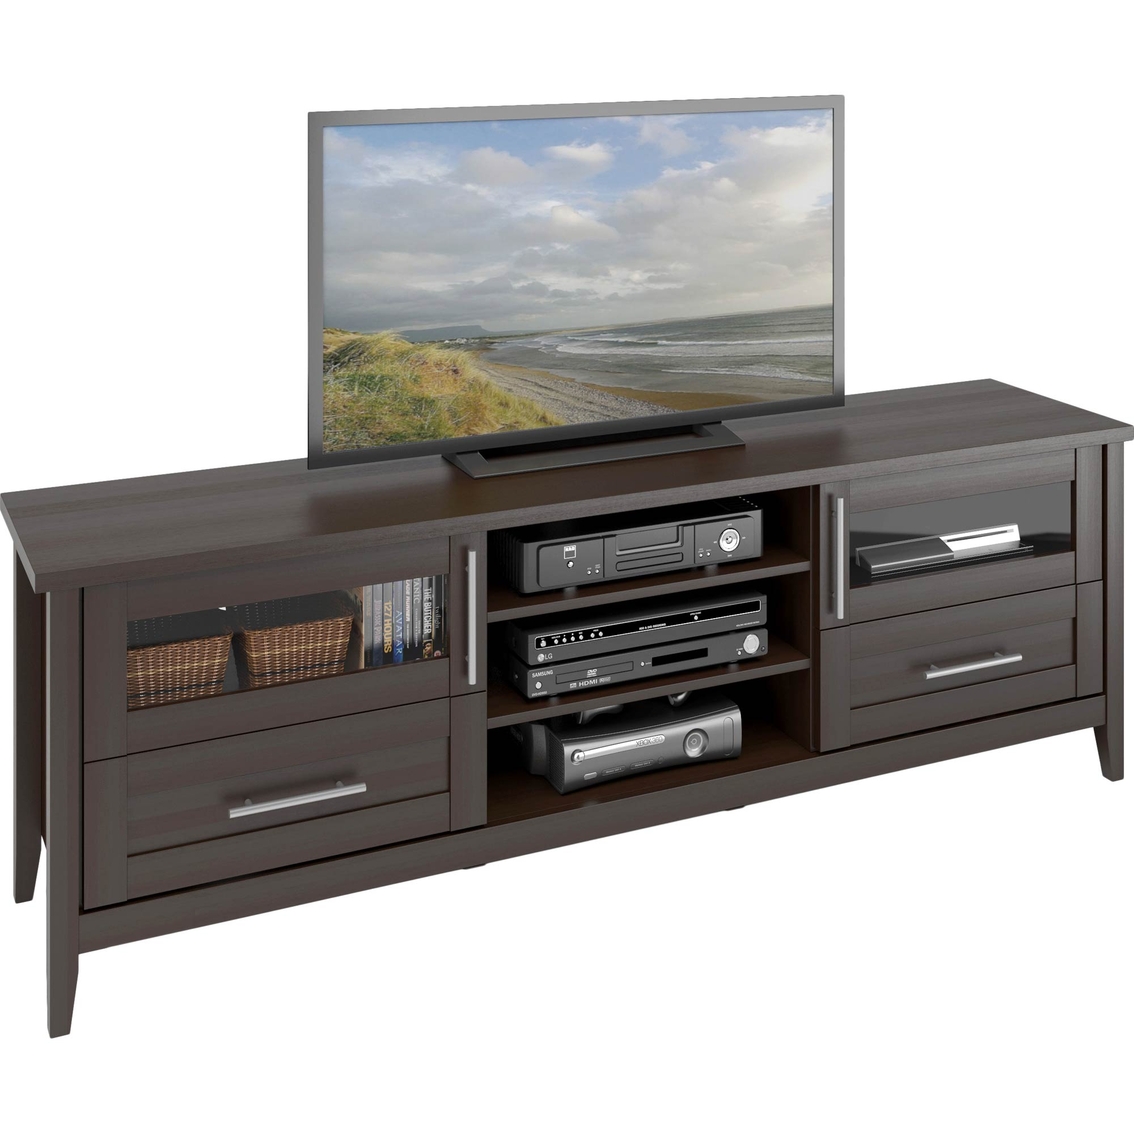 CorLiving Jackson Extra Wide TV Bench for TVs up to 80 in. - Image 2 of 3